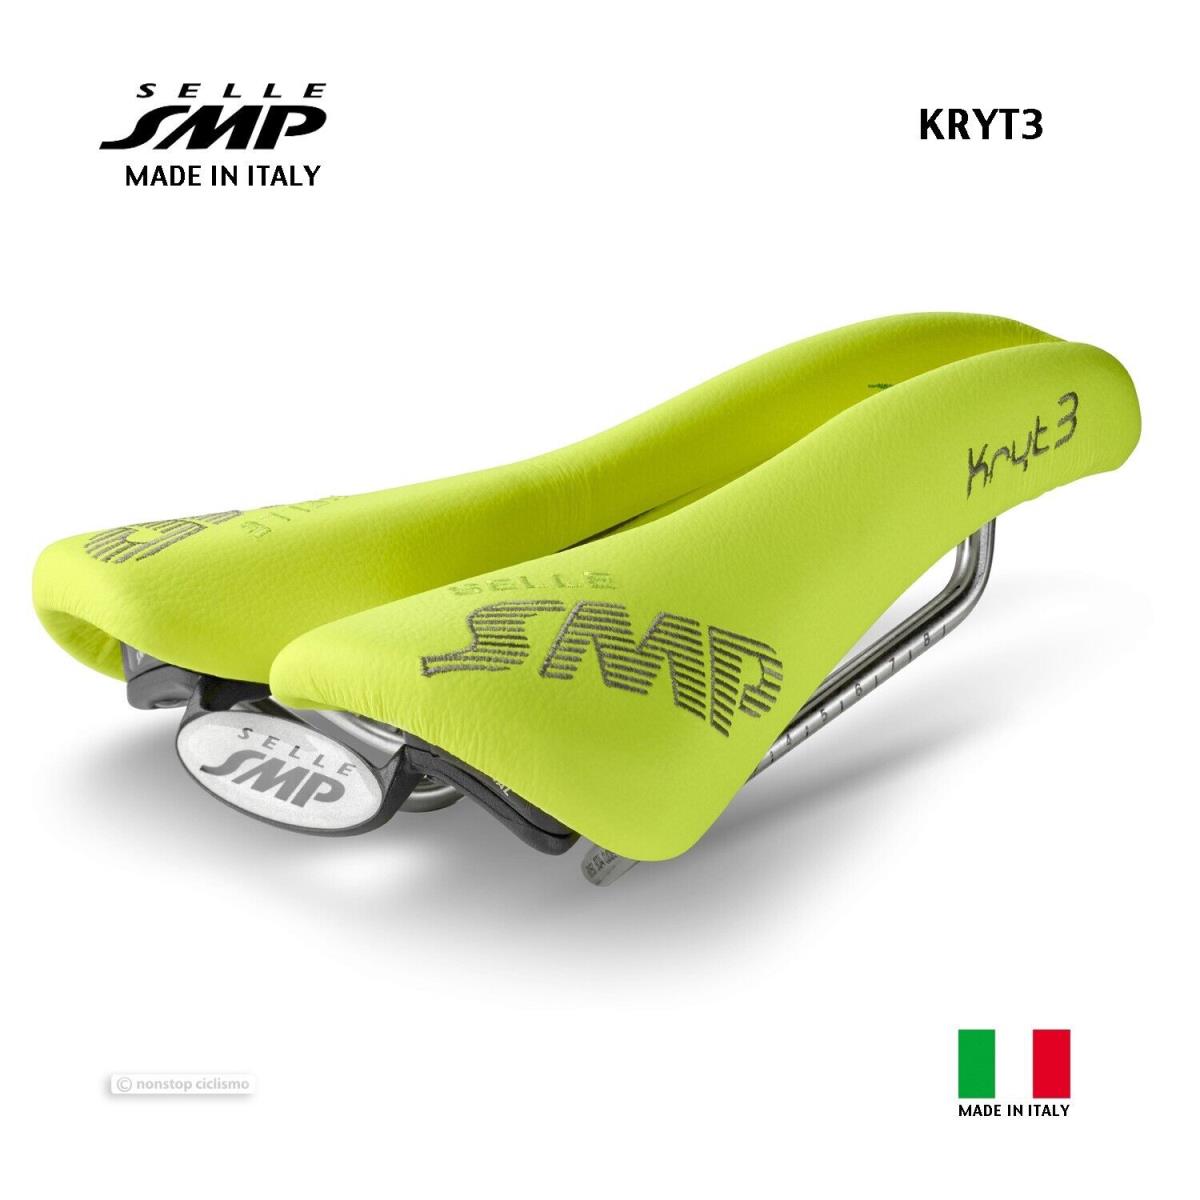 Selle Smp KRYT3 Criterum Saddle : Yellow Fluo - Made IN Italy